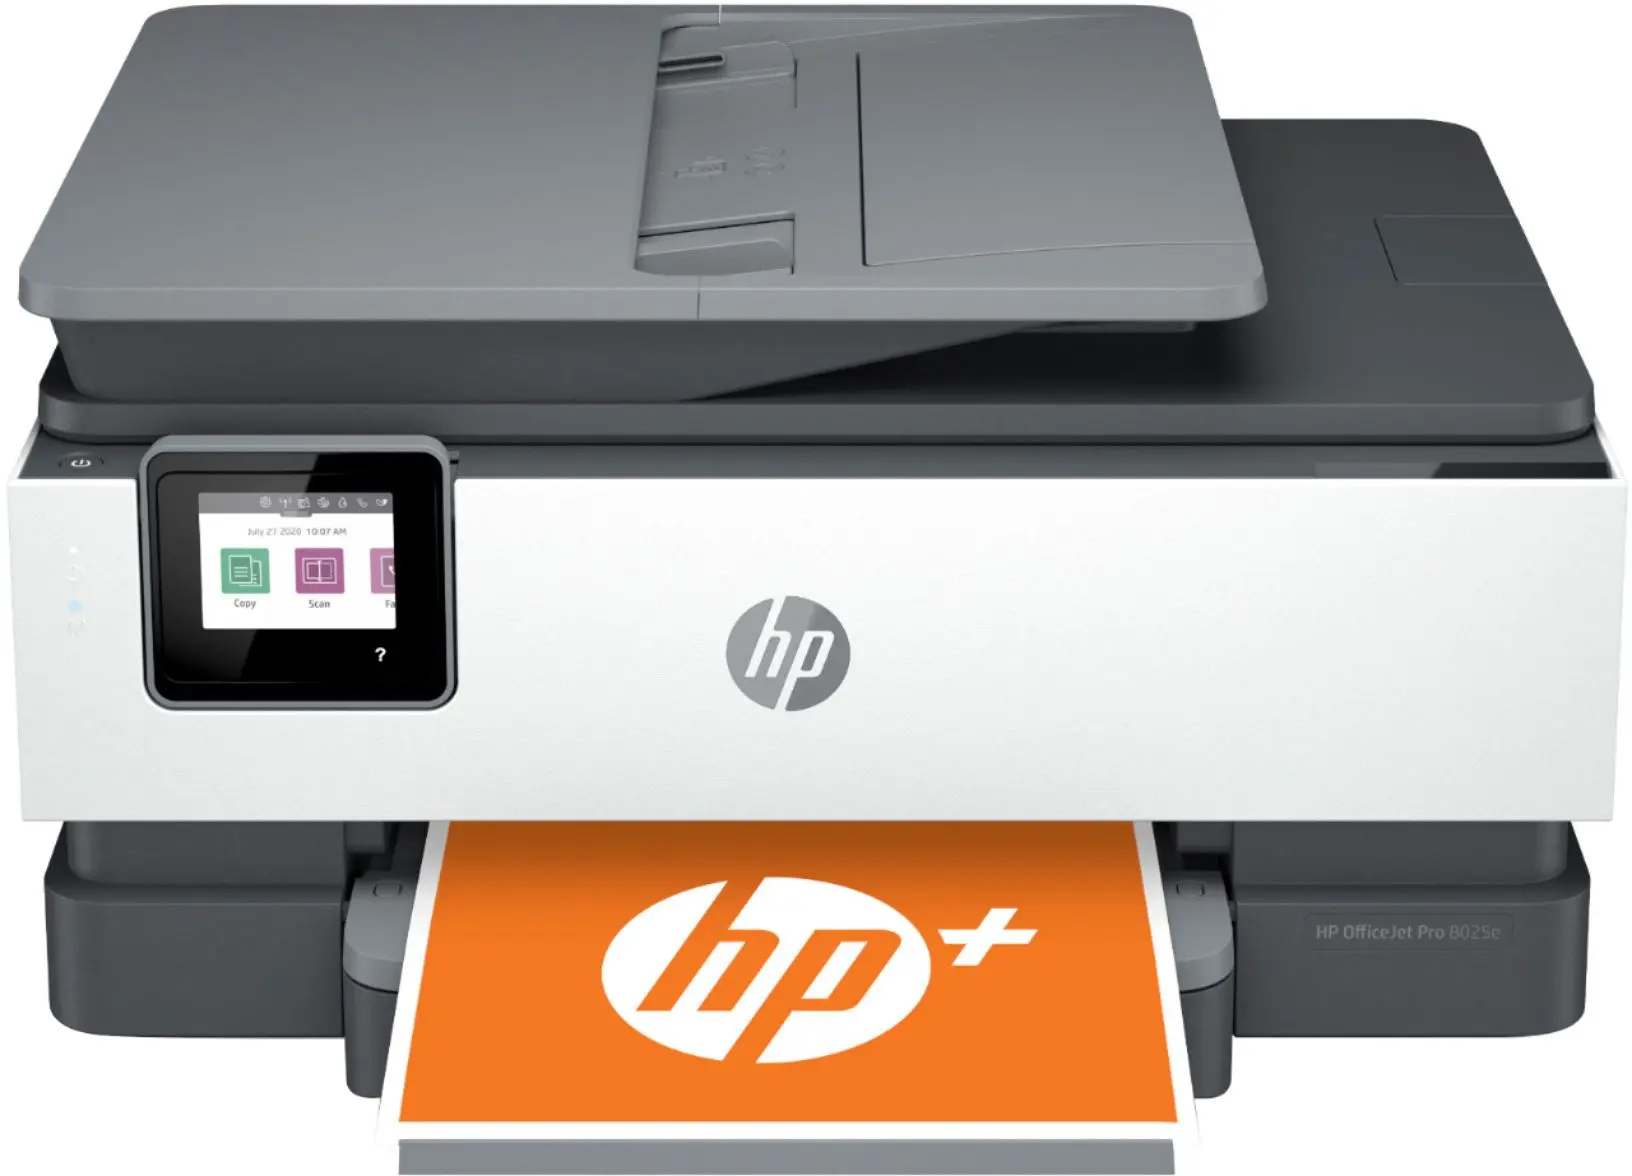 hewlett packard officejet pro 8025 all-in-one wireless printer - Is the HP 8025e printer discontinued